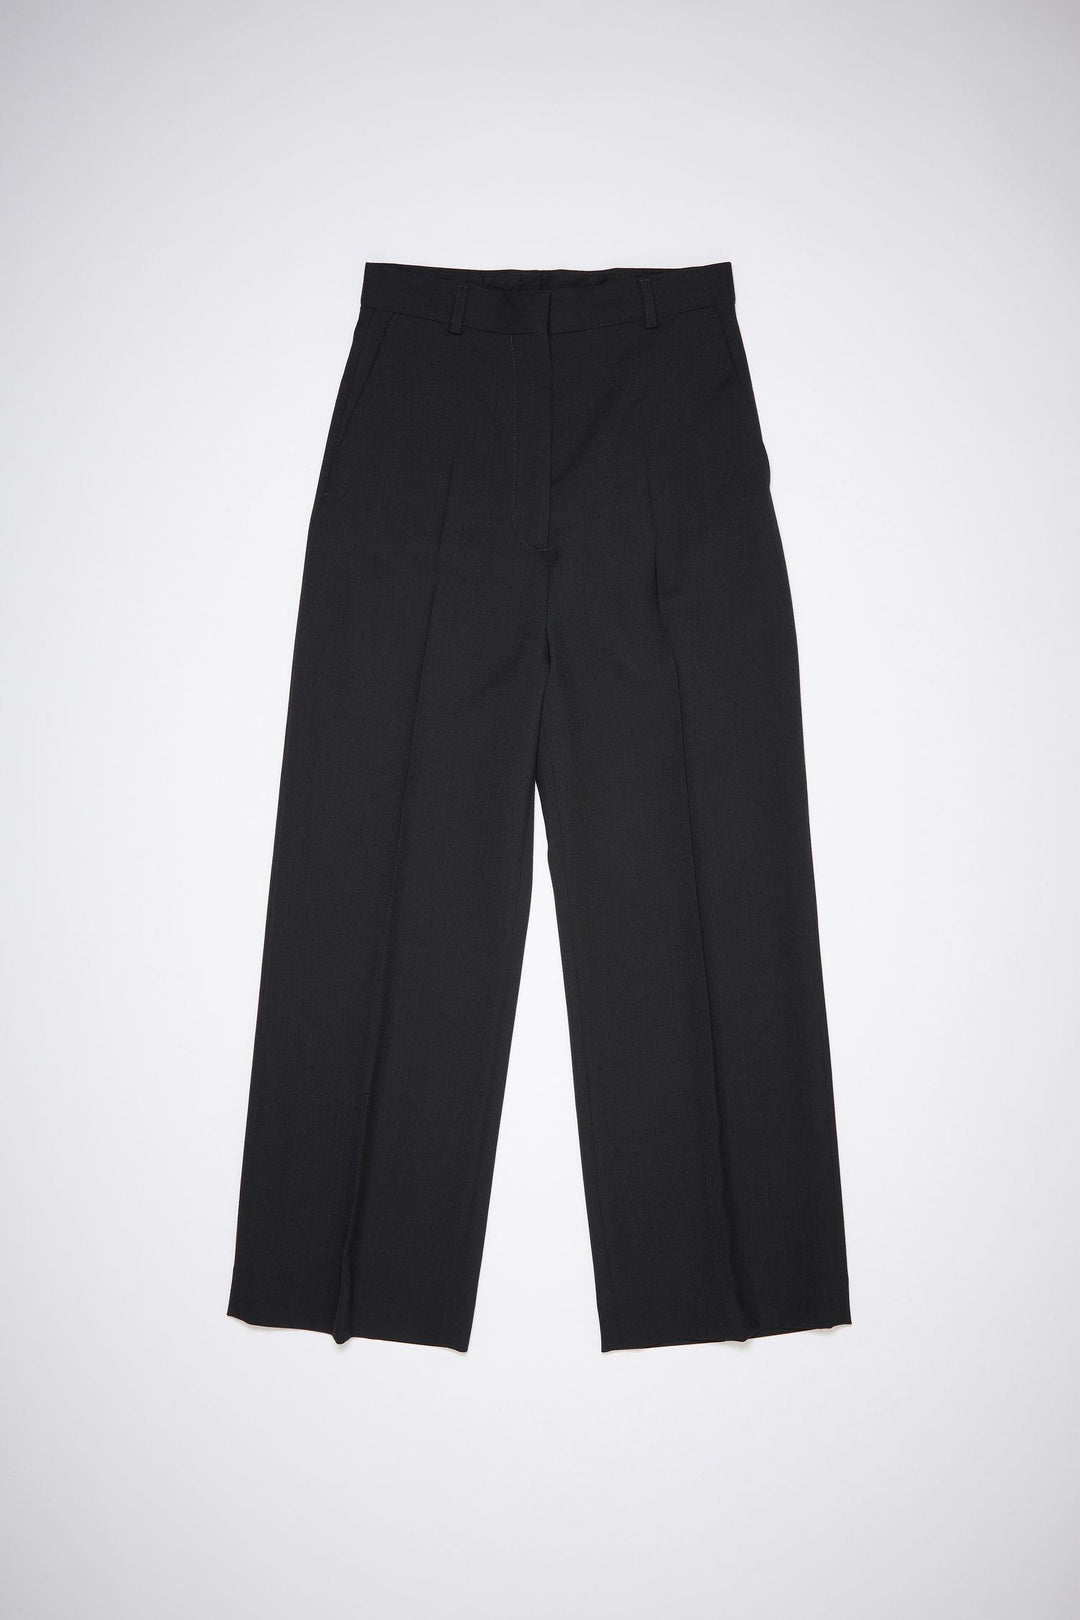 TAILORED TROUSERS - BLACK - Dale